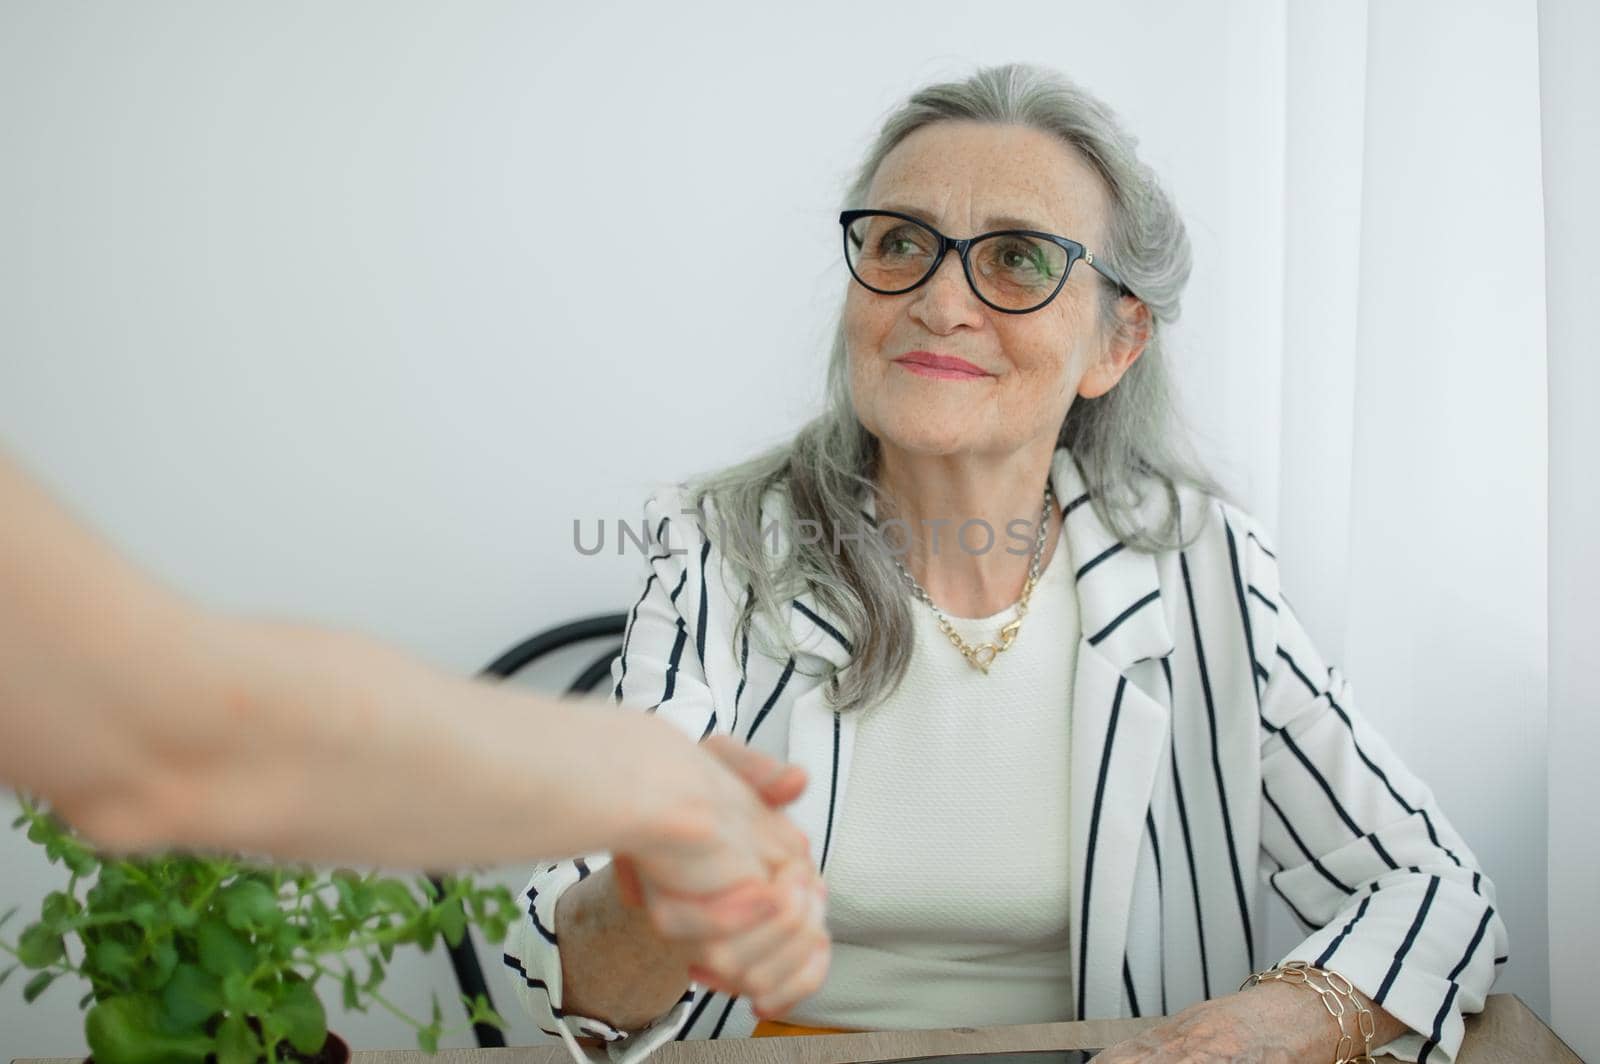 Mature businesswoman is leading an interview with new colleague and shaking their hand at the end. Business people concept.